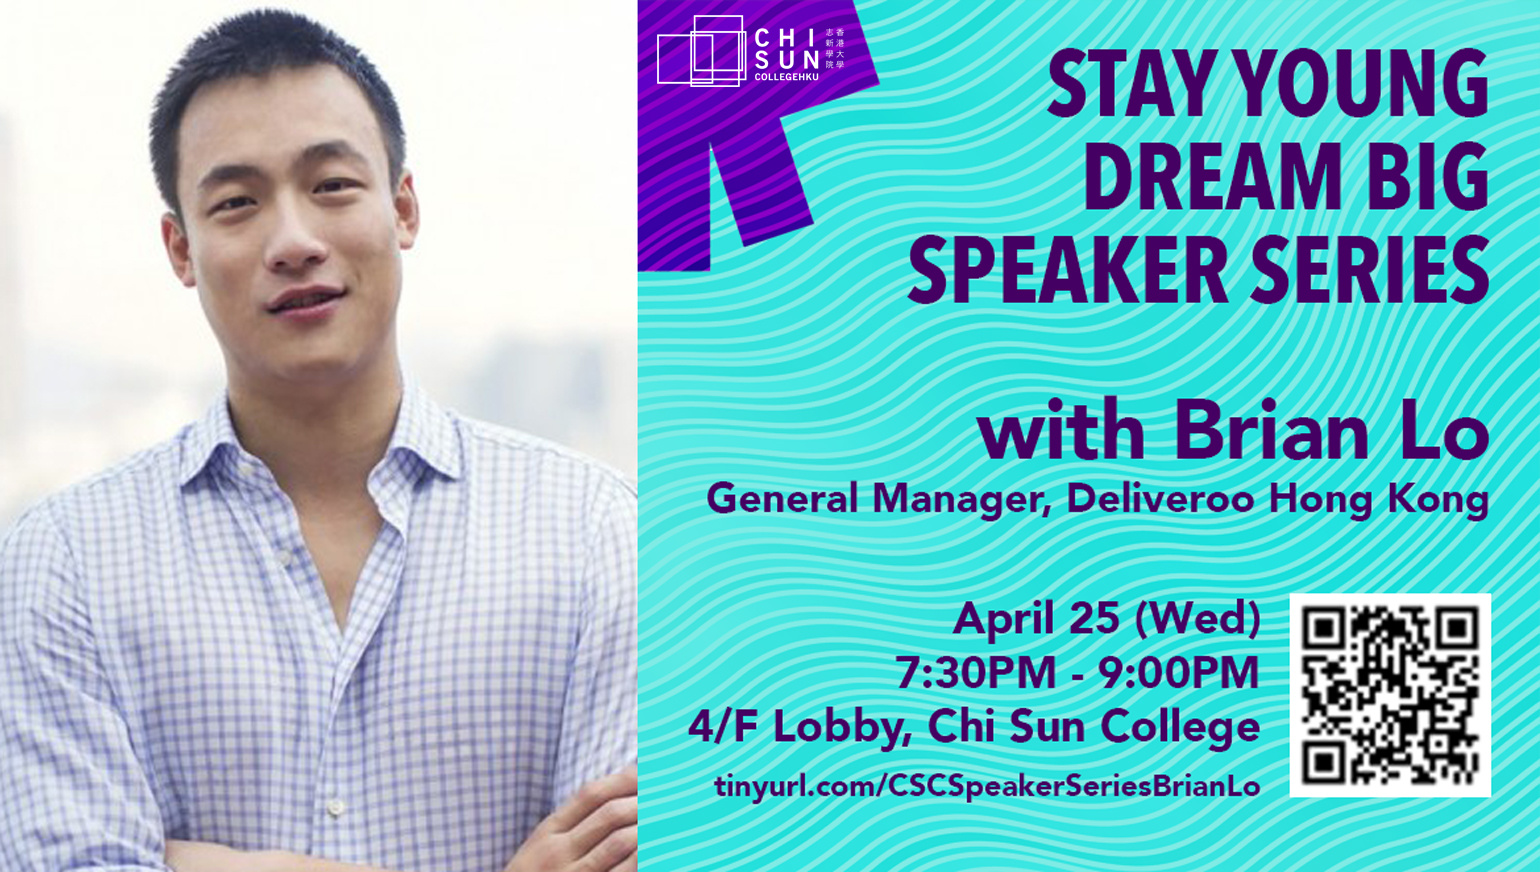 Speaker Series with Brian Lo, Deliveroo Hong Kong